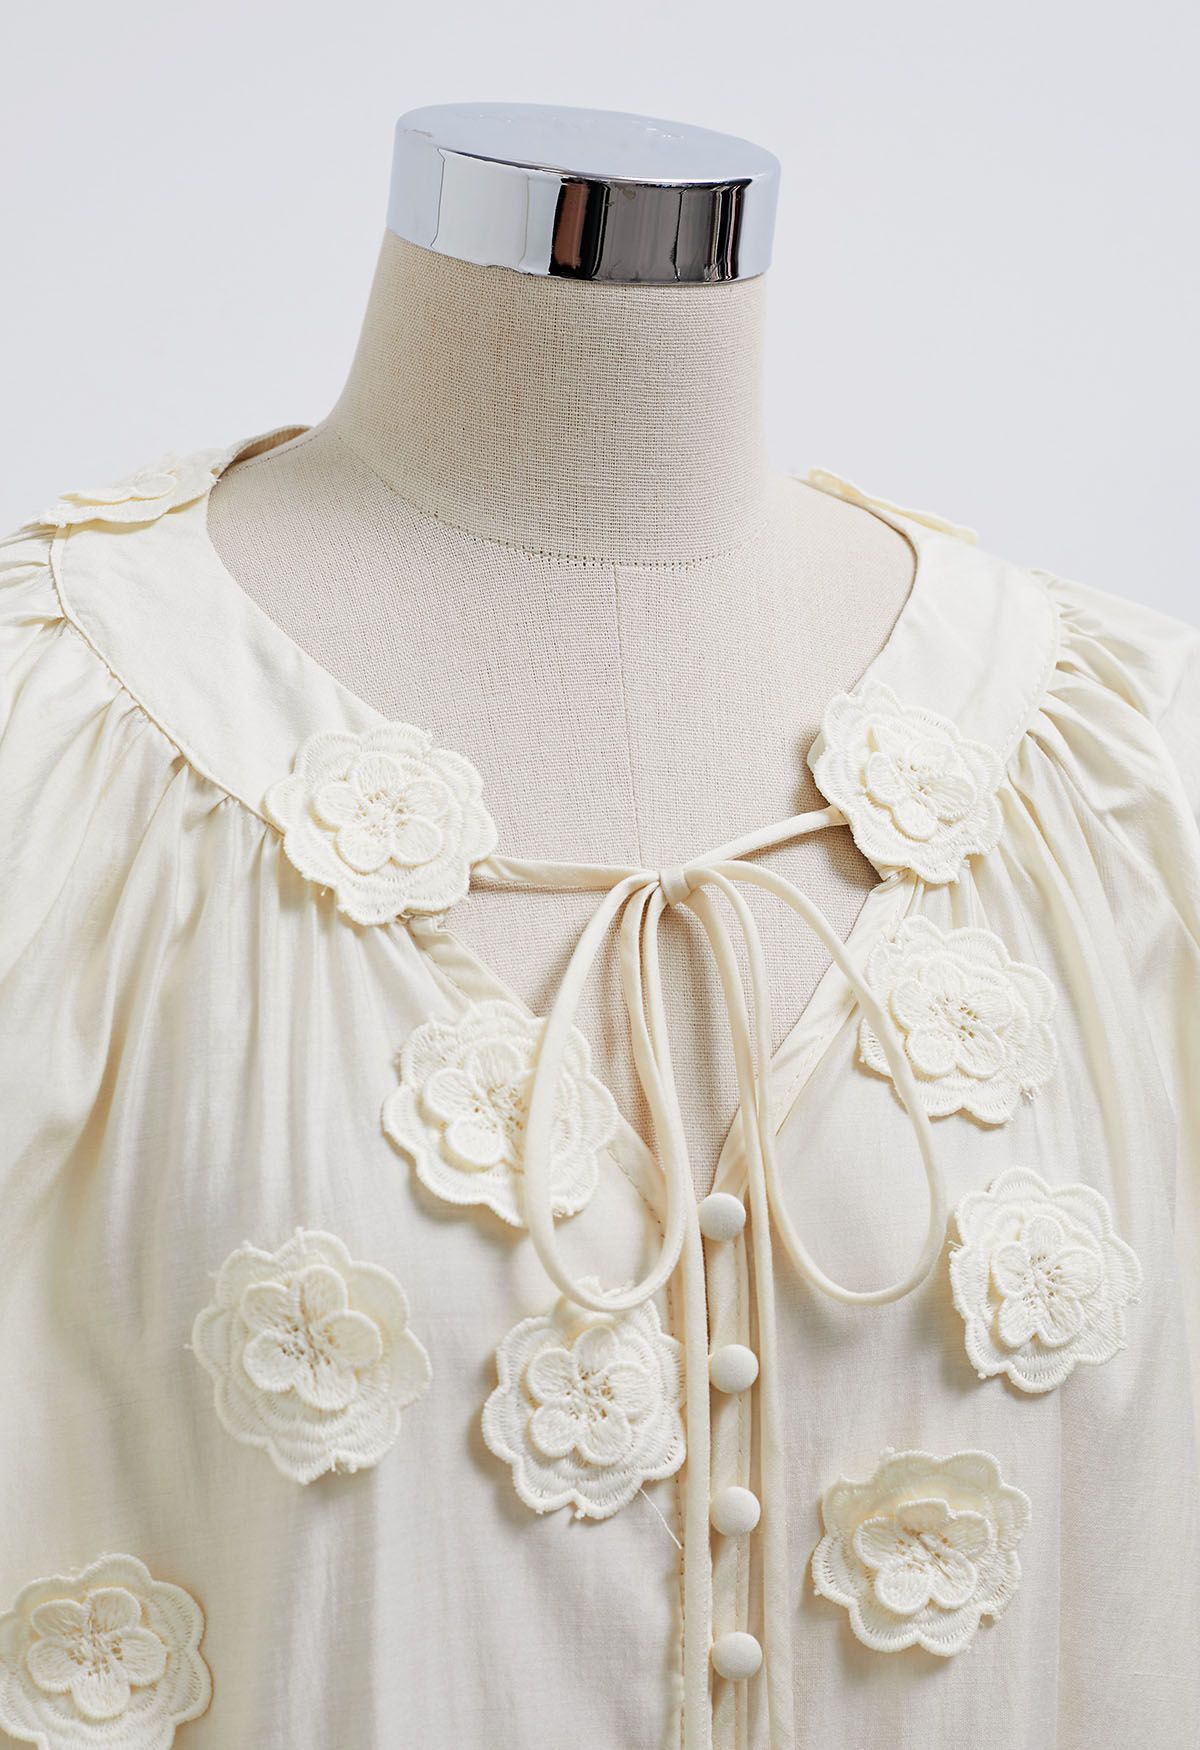 Romantic Blossom 3D Lace Flowers Buttoned Shirt in Light Yellow